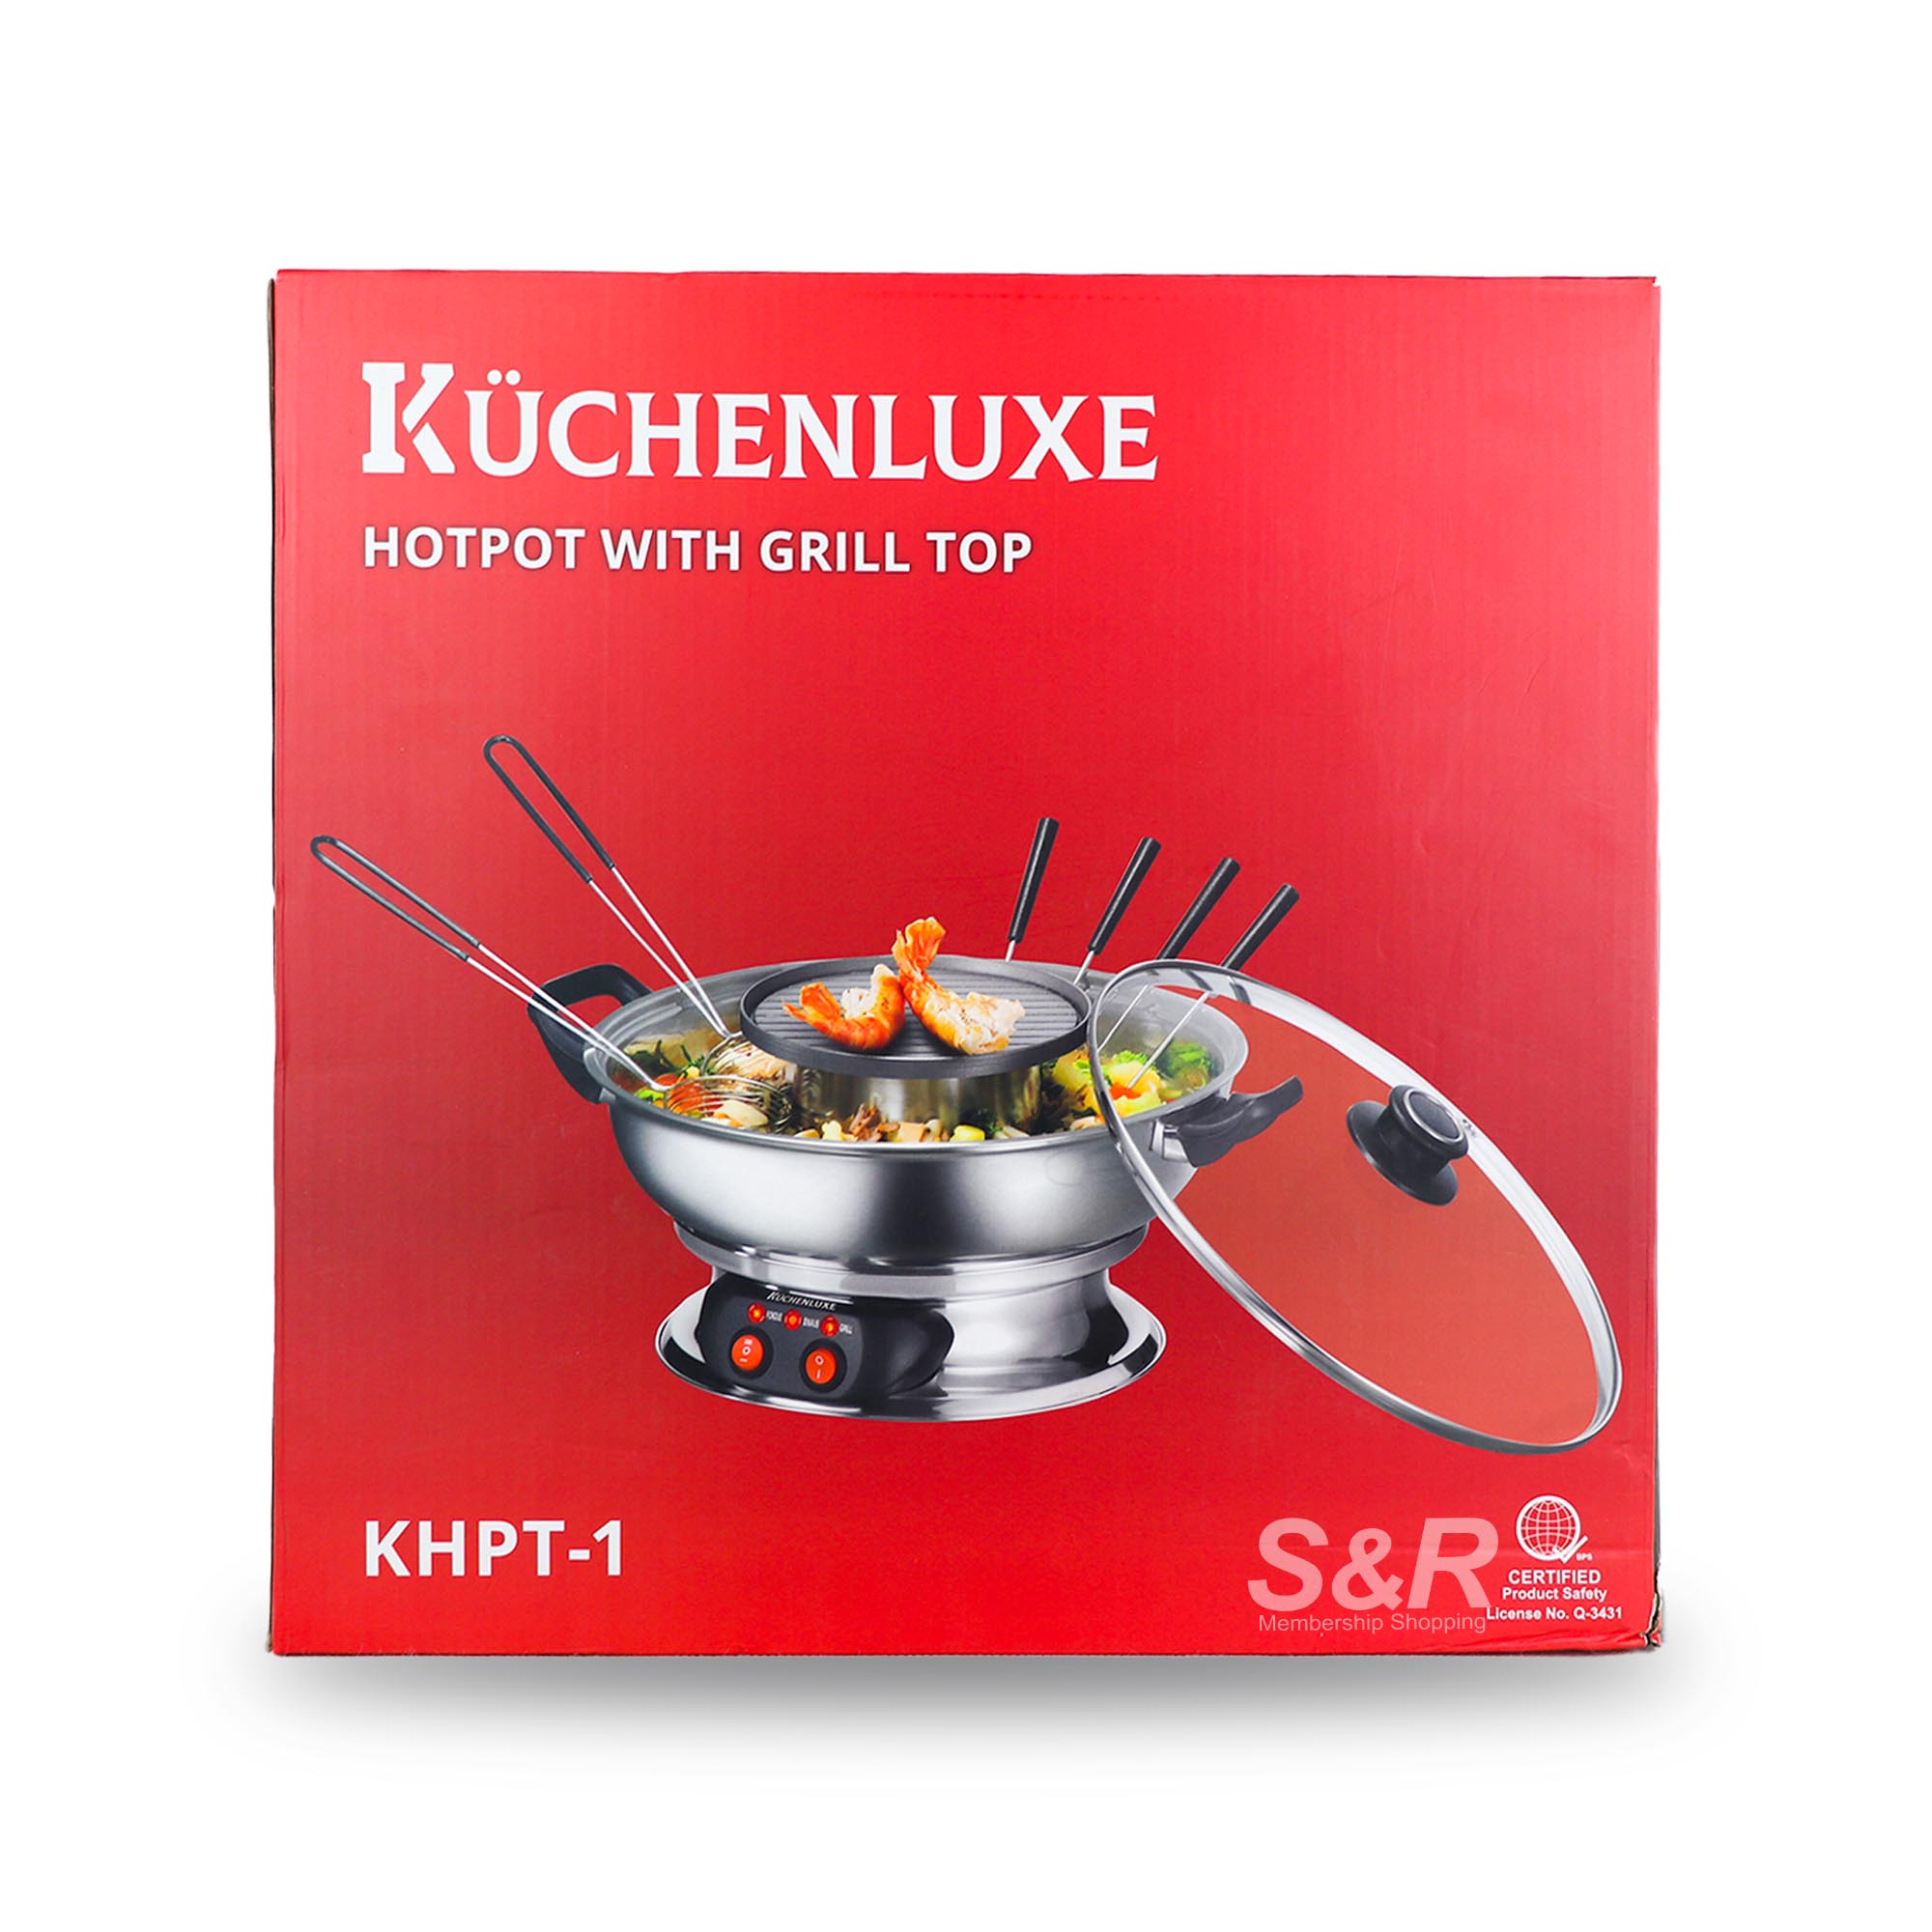 Kuchenluxe Hotpot With Grill Top